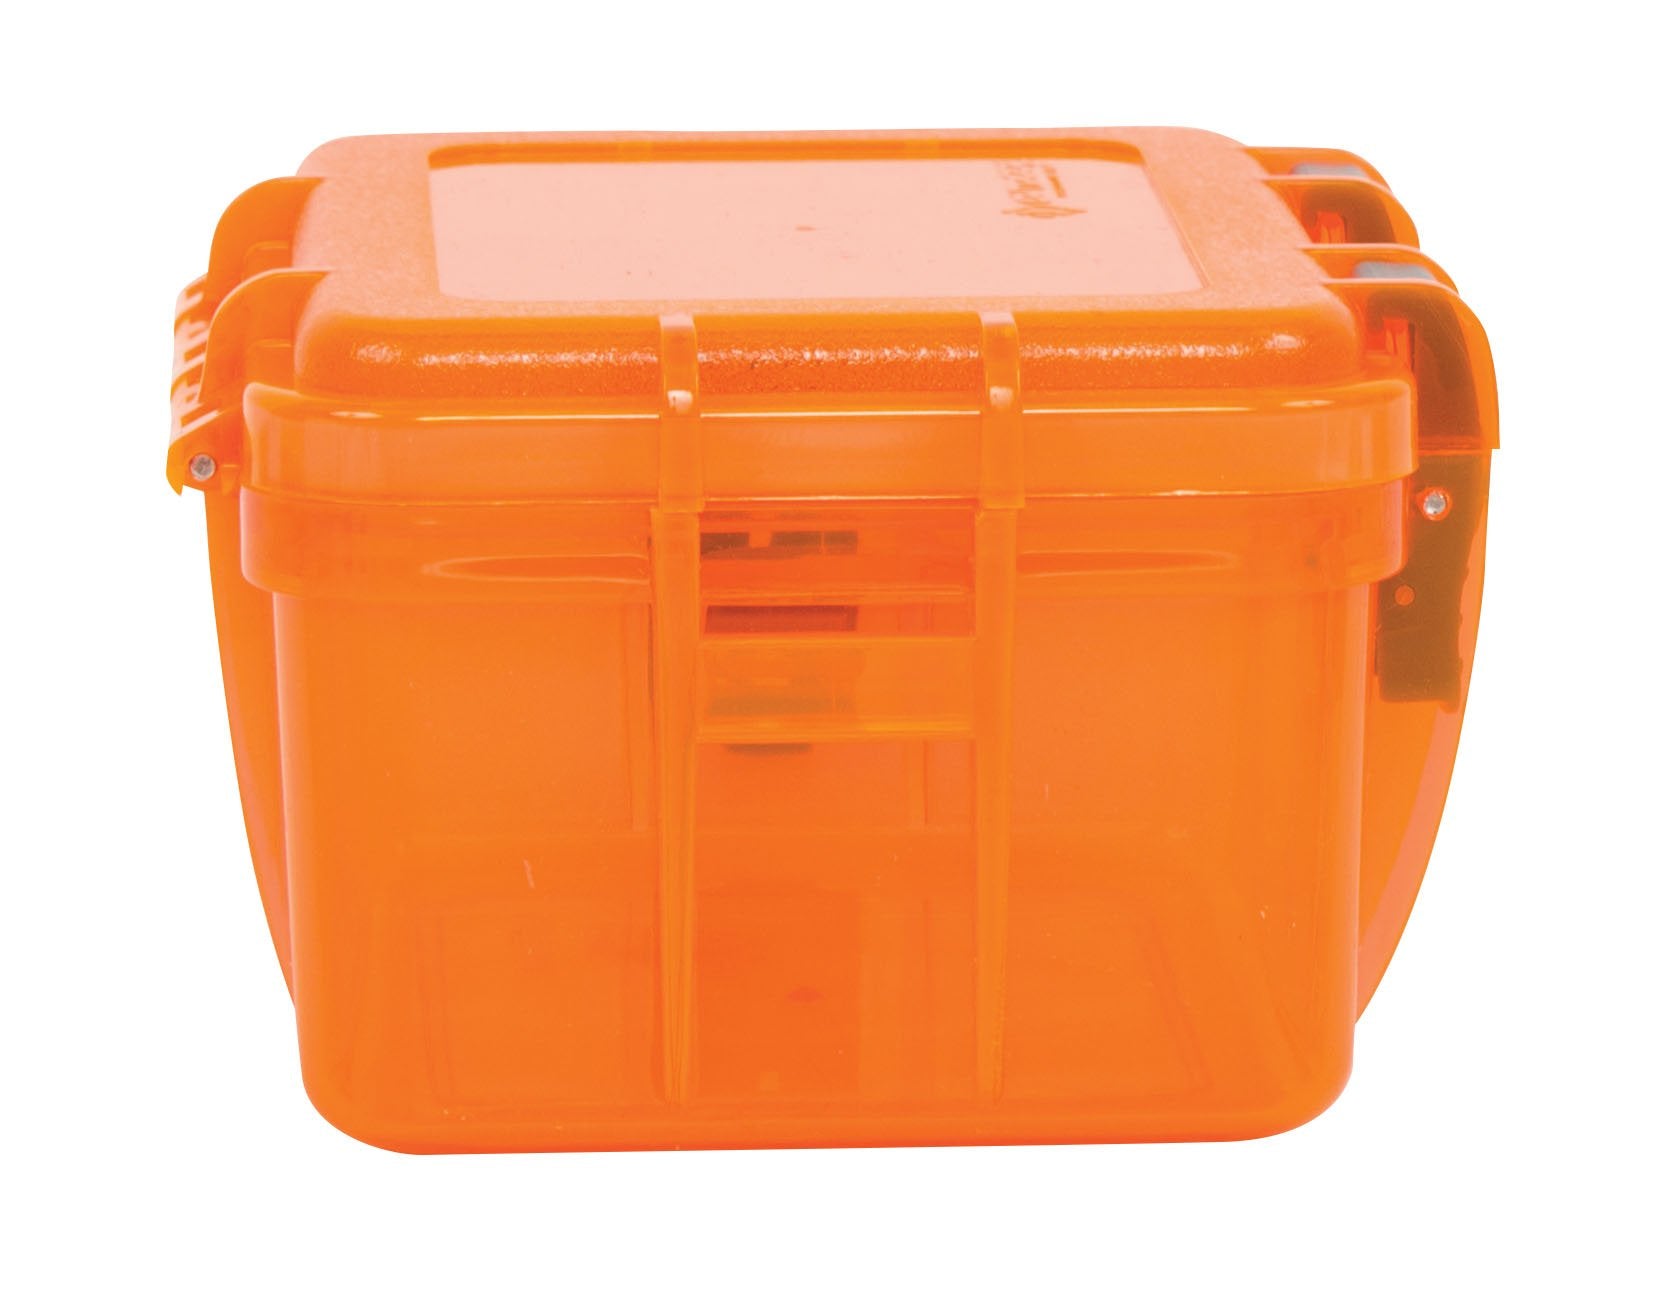 Watertight Box Outdoor,Waterproof Box For Boat,Utility Dry Box